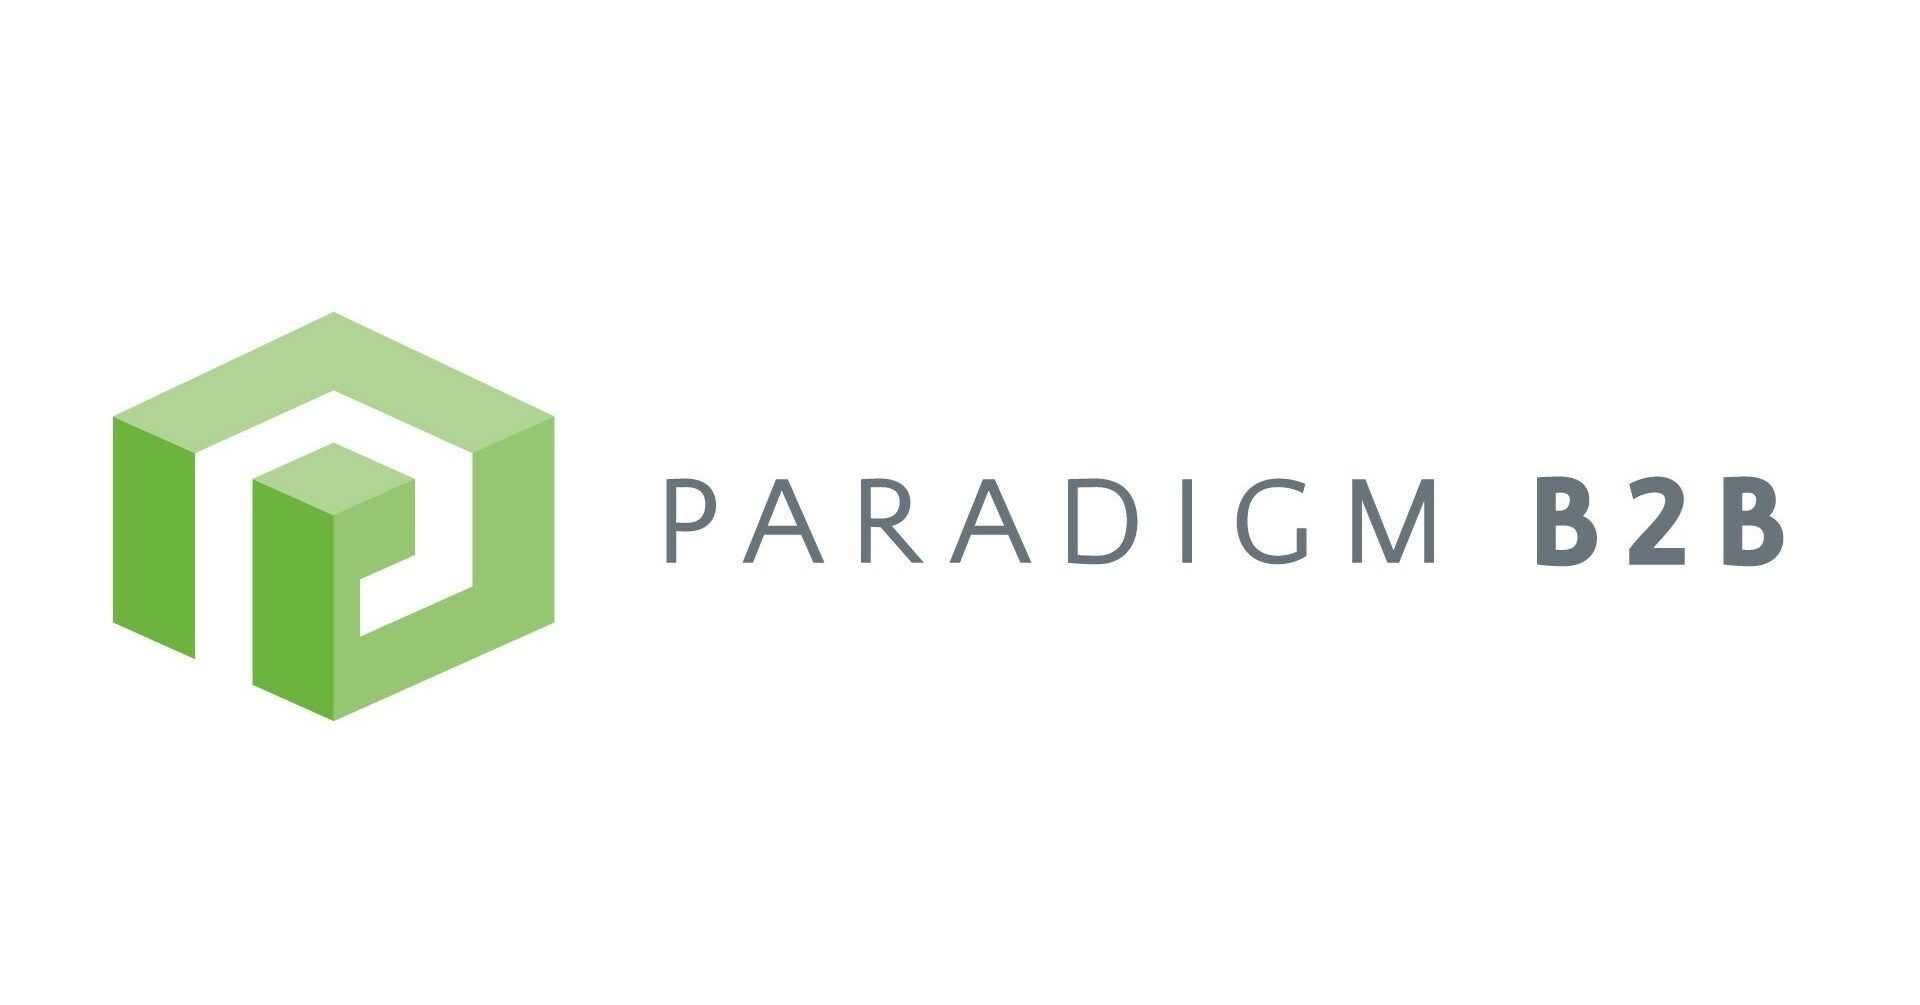 BigCommerce Scores 22 Total Medals in 2022 Paradigm B2B Combine Midmarket and Enterprise Editions